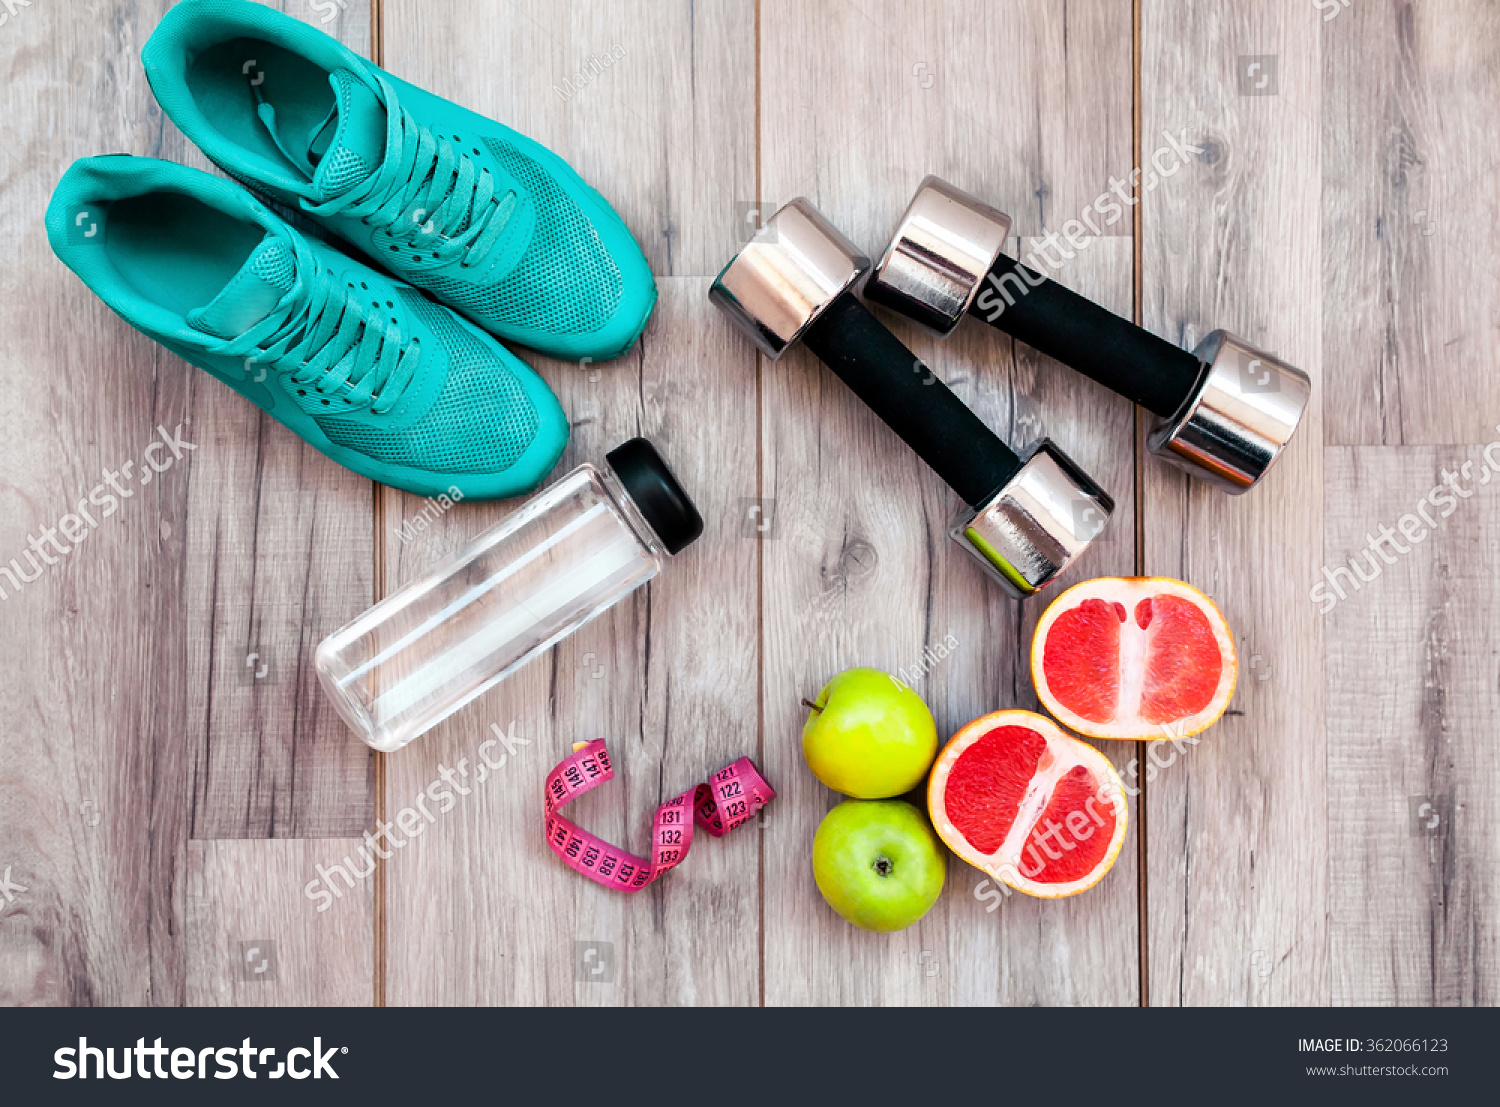 Fitness equipment. Healthy food. Sneakers, water,apple  on wooden background #362066123